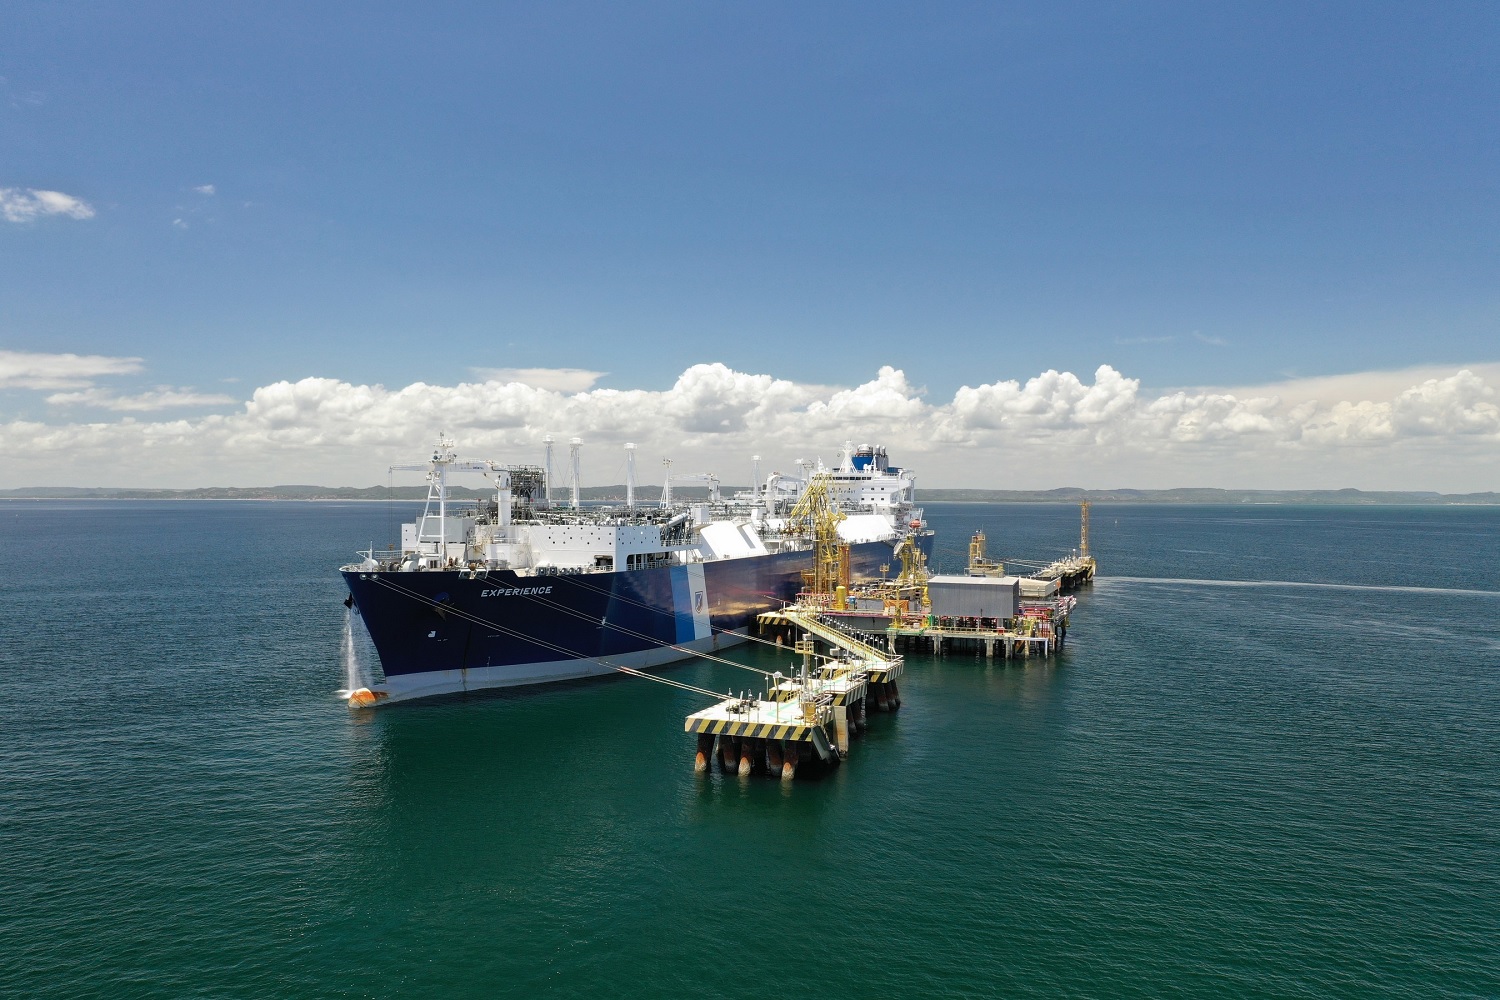 Excelerate Energy advances in Bahia LNG terminal lease